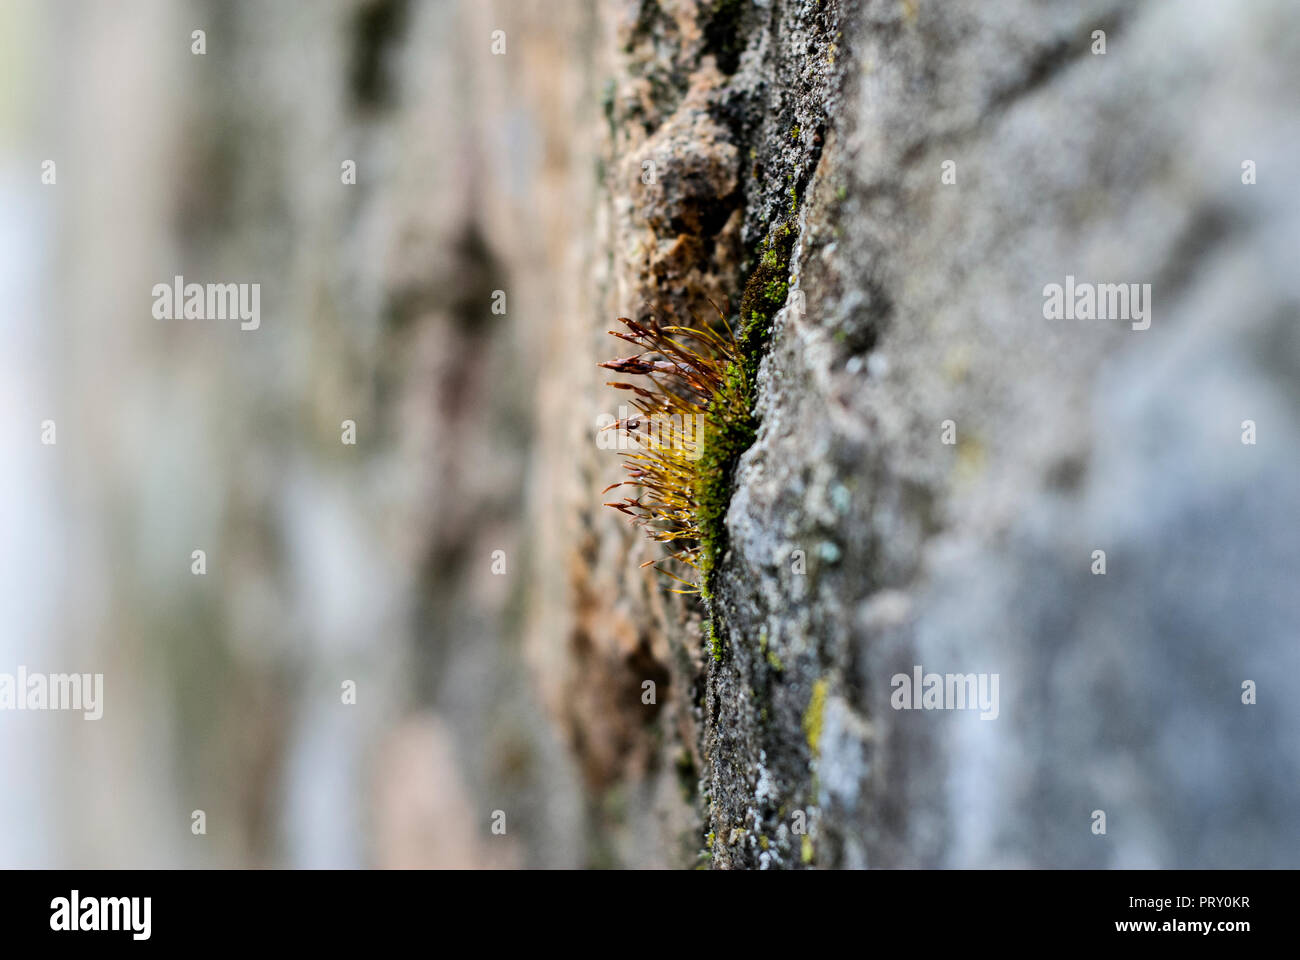 Tiny clump of moss growing in a crack of wall Stock Photo